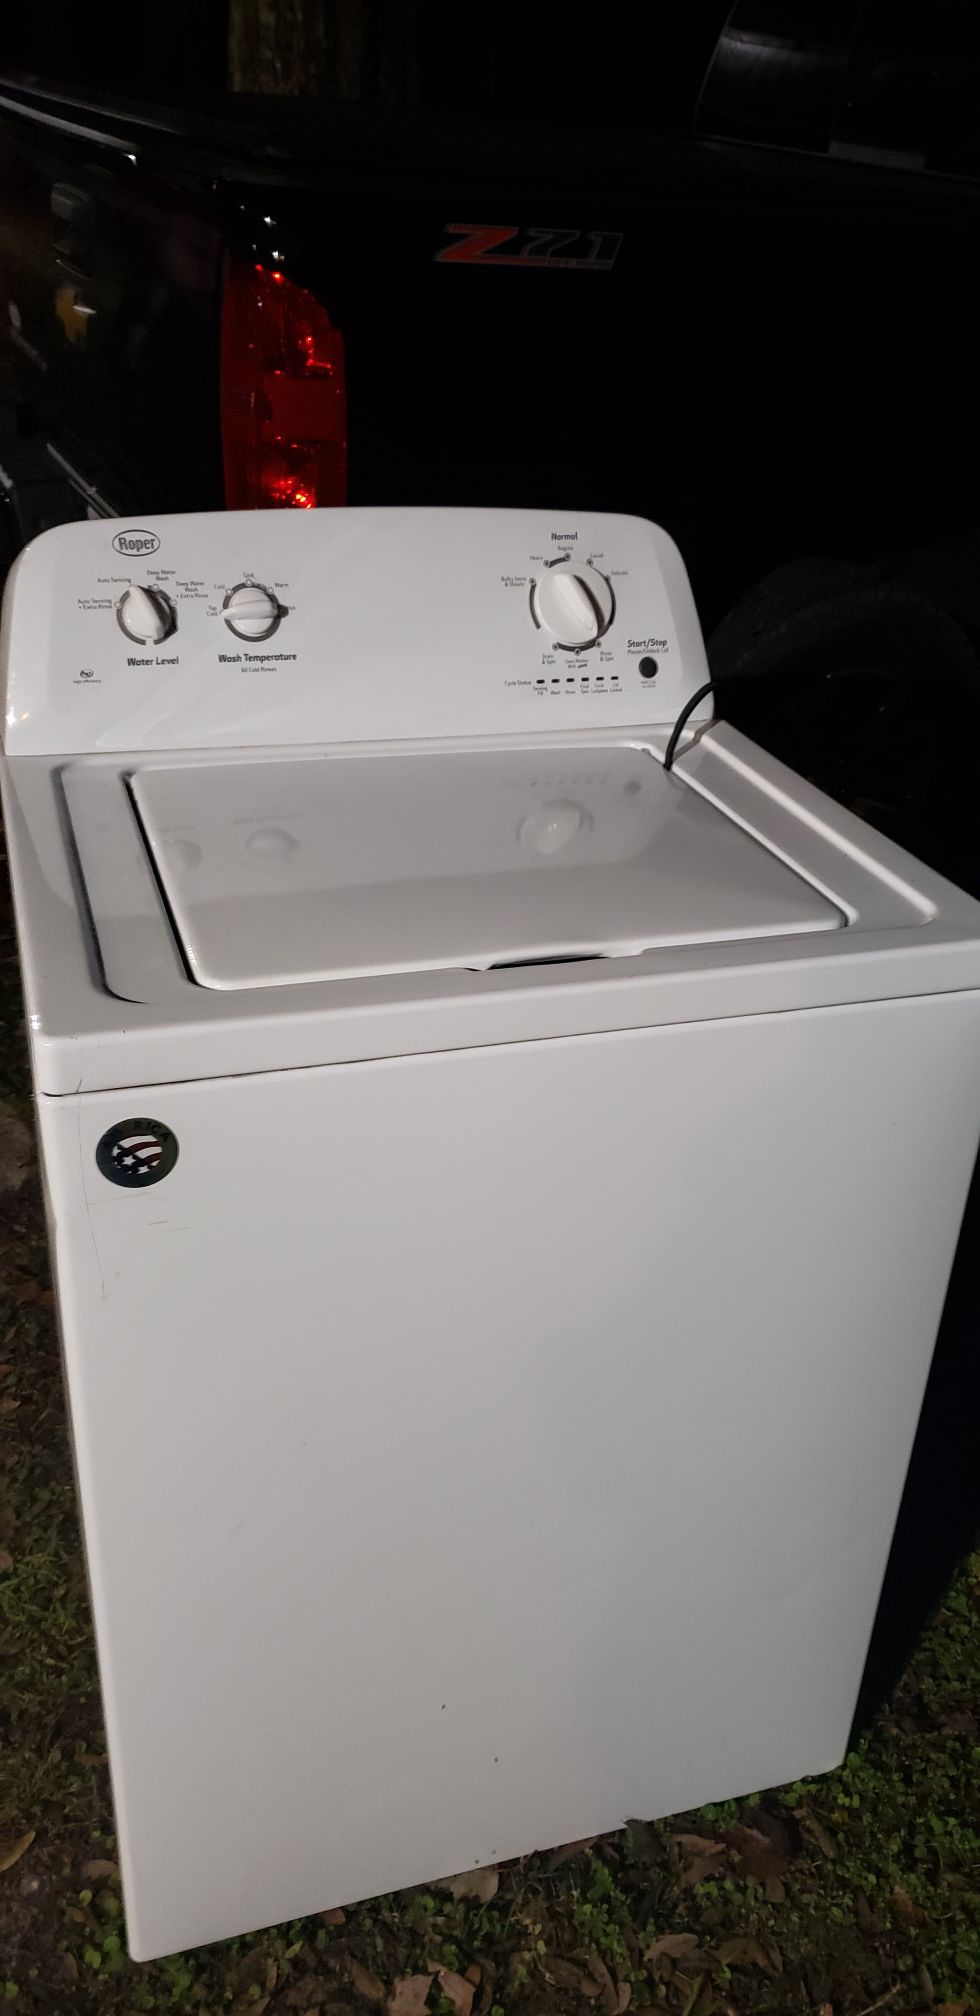 GIVEN AWAY. Roper Washing Machine Excellent